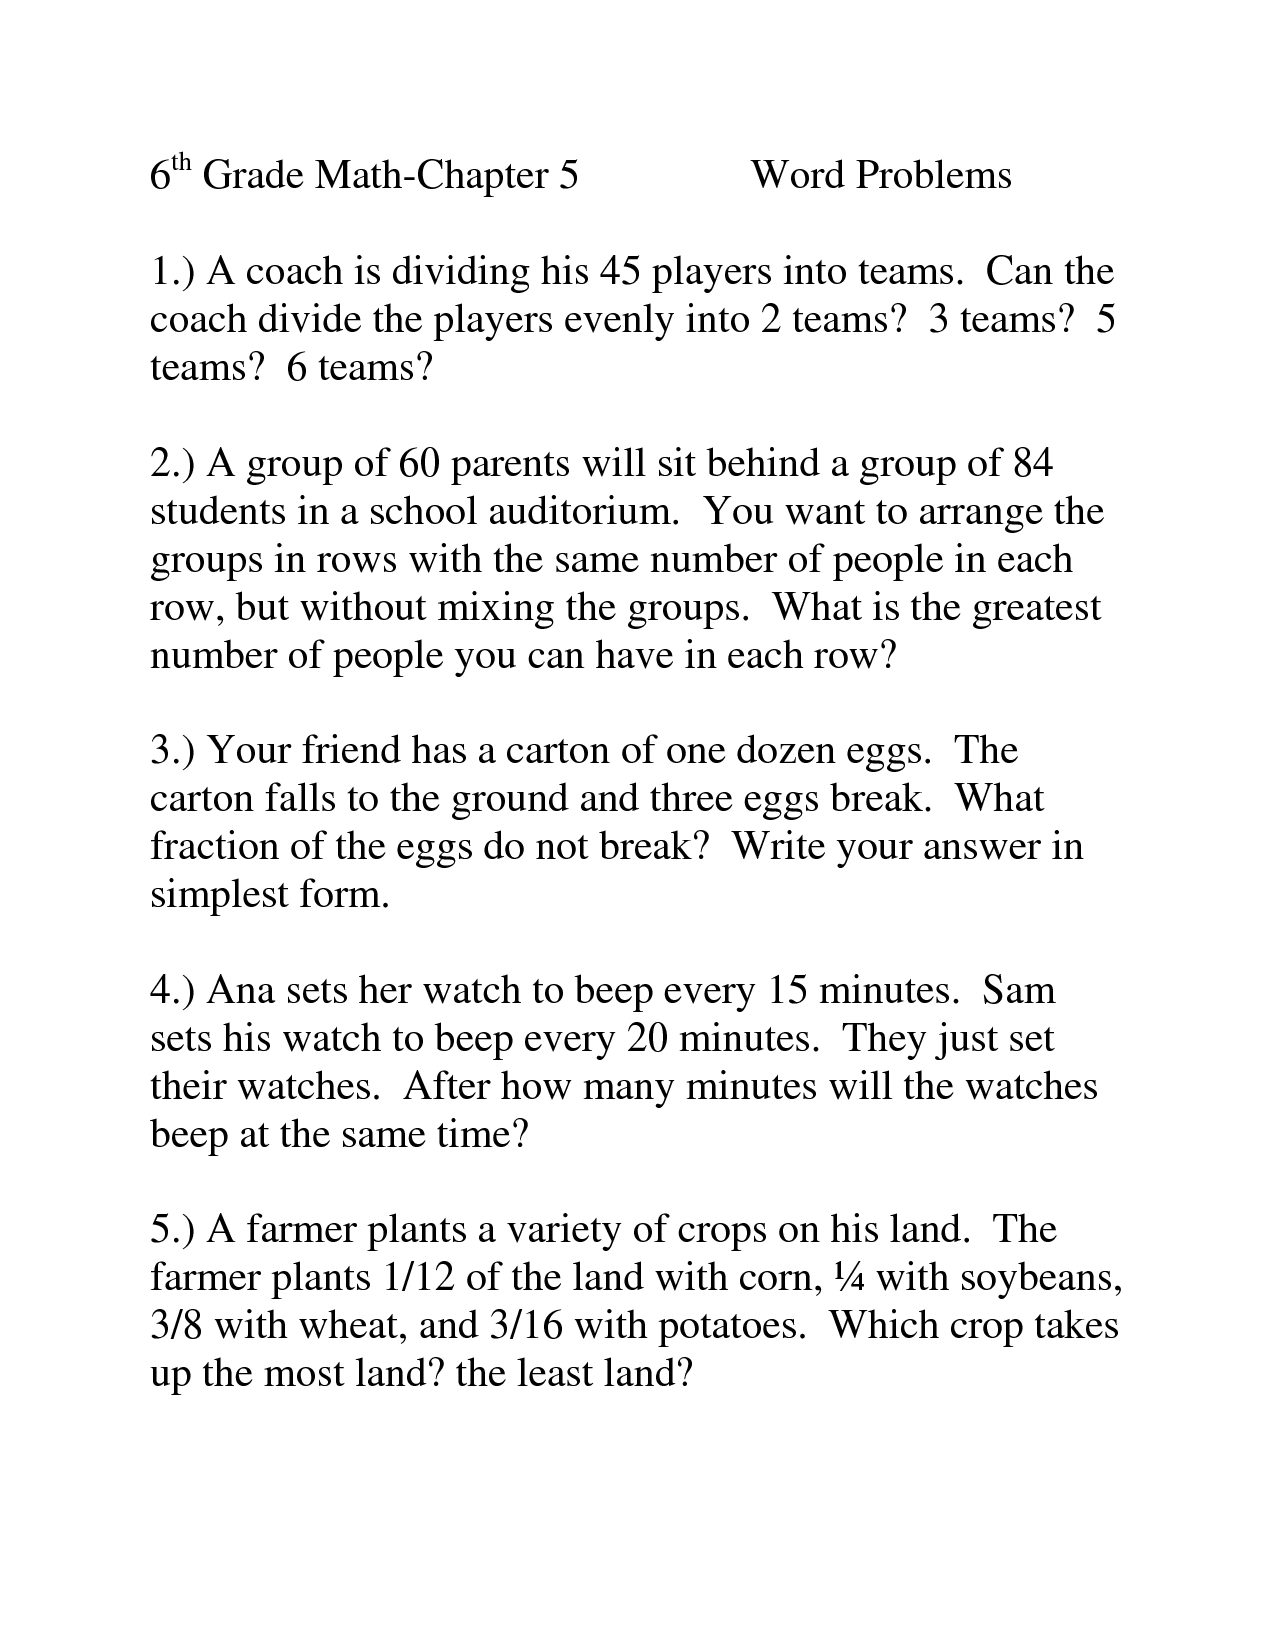 16-best-images-of-6th-grade-math-worksheets-problems-6th-grade-math